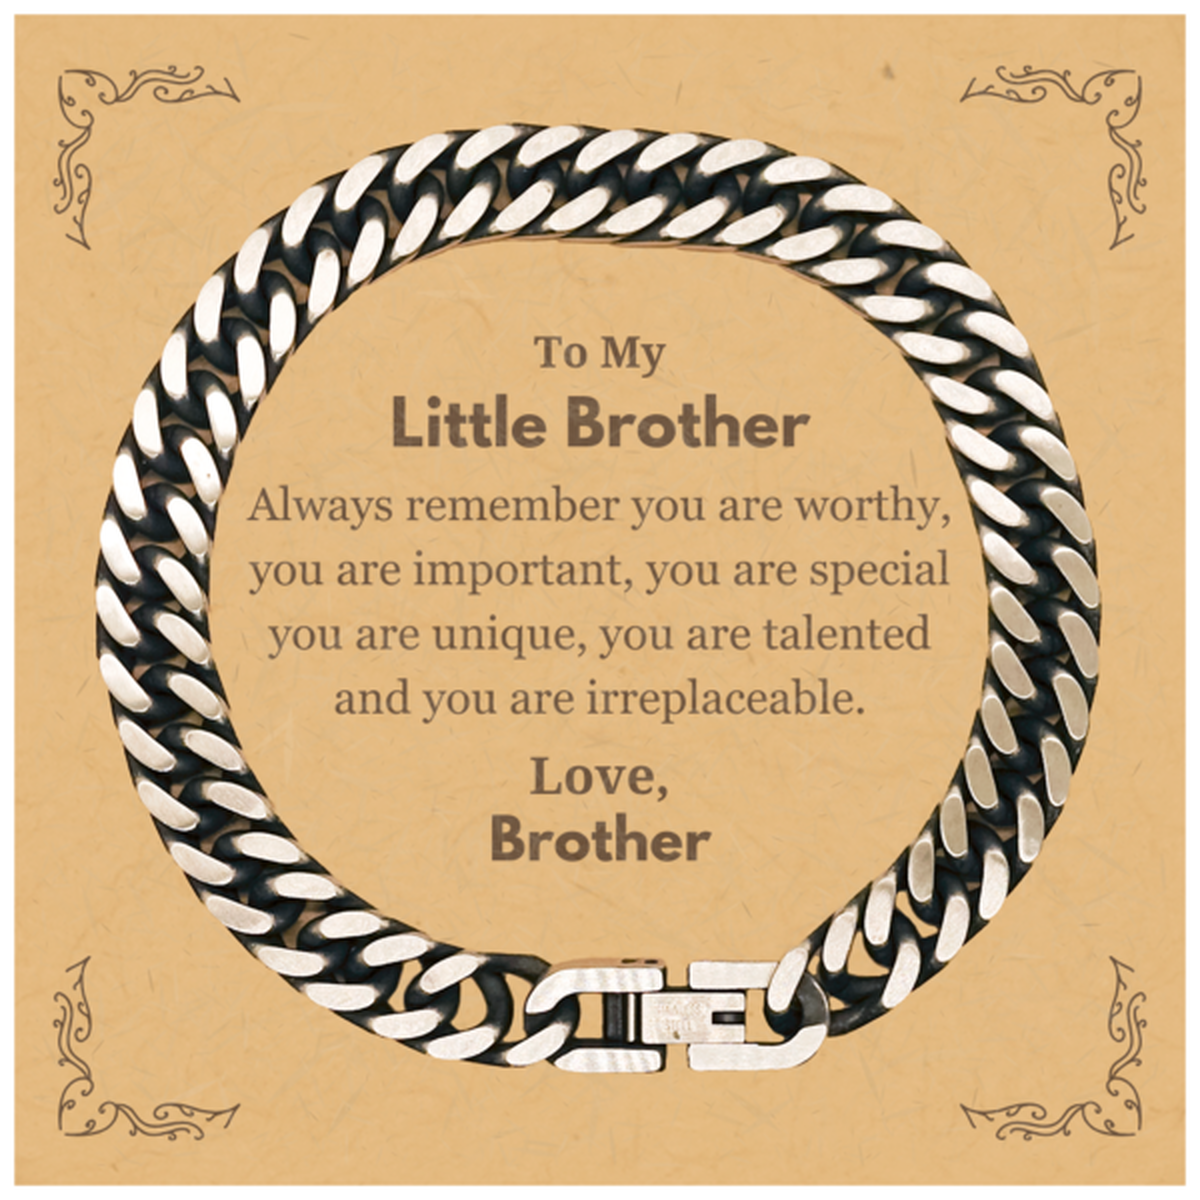 Little Brother Birthday Gifts from Brother, Inspirational Cuban Link Chain Bracelet for Little Brother Christmas Graduation Gifts for Little Brother Always remember you are worthy, you are important. Love, Brother